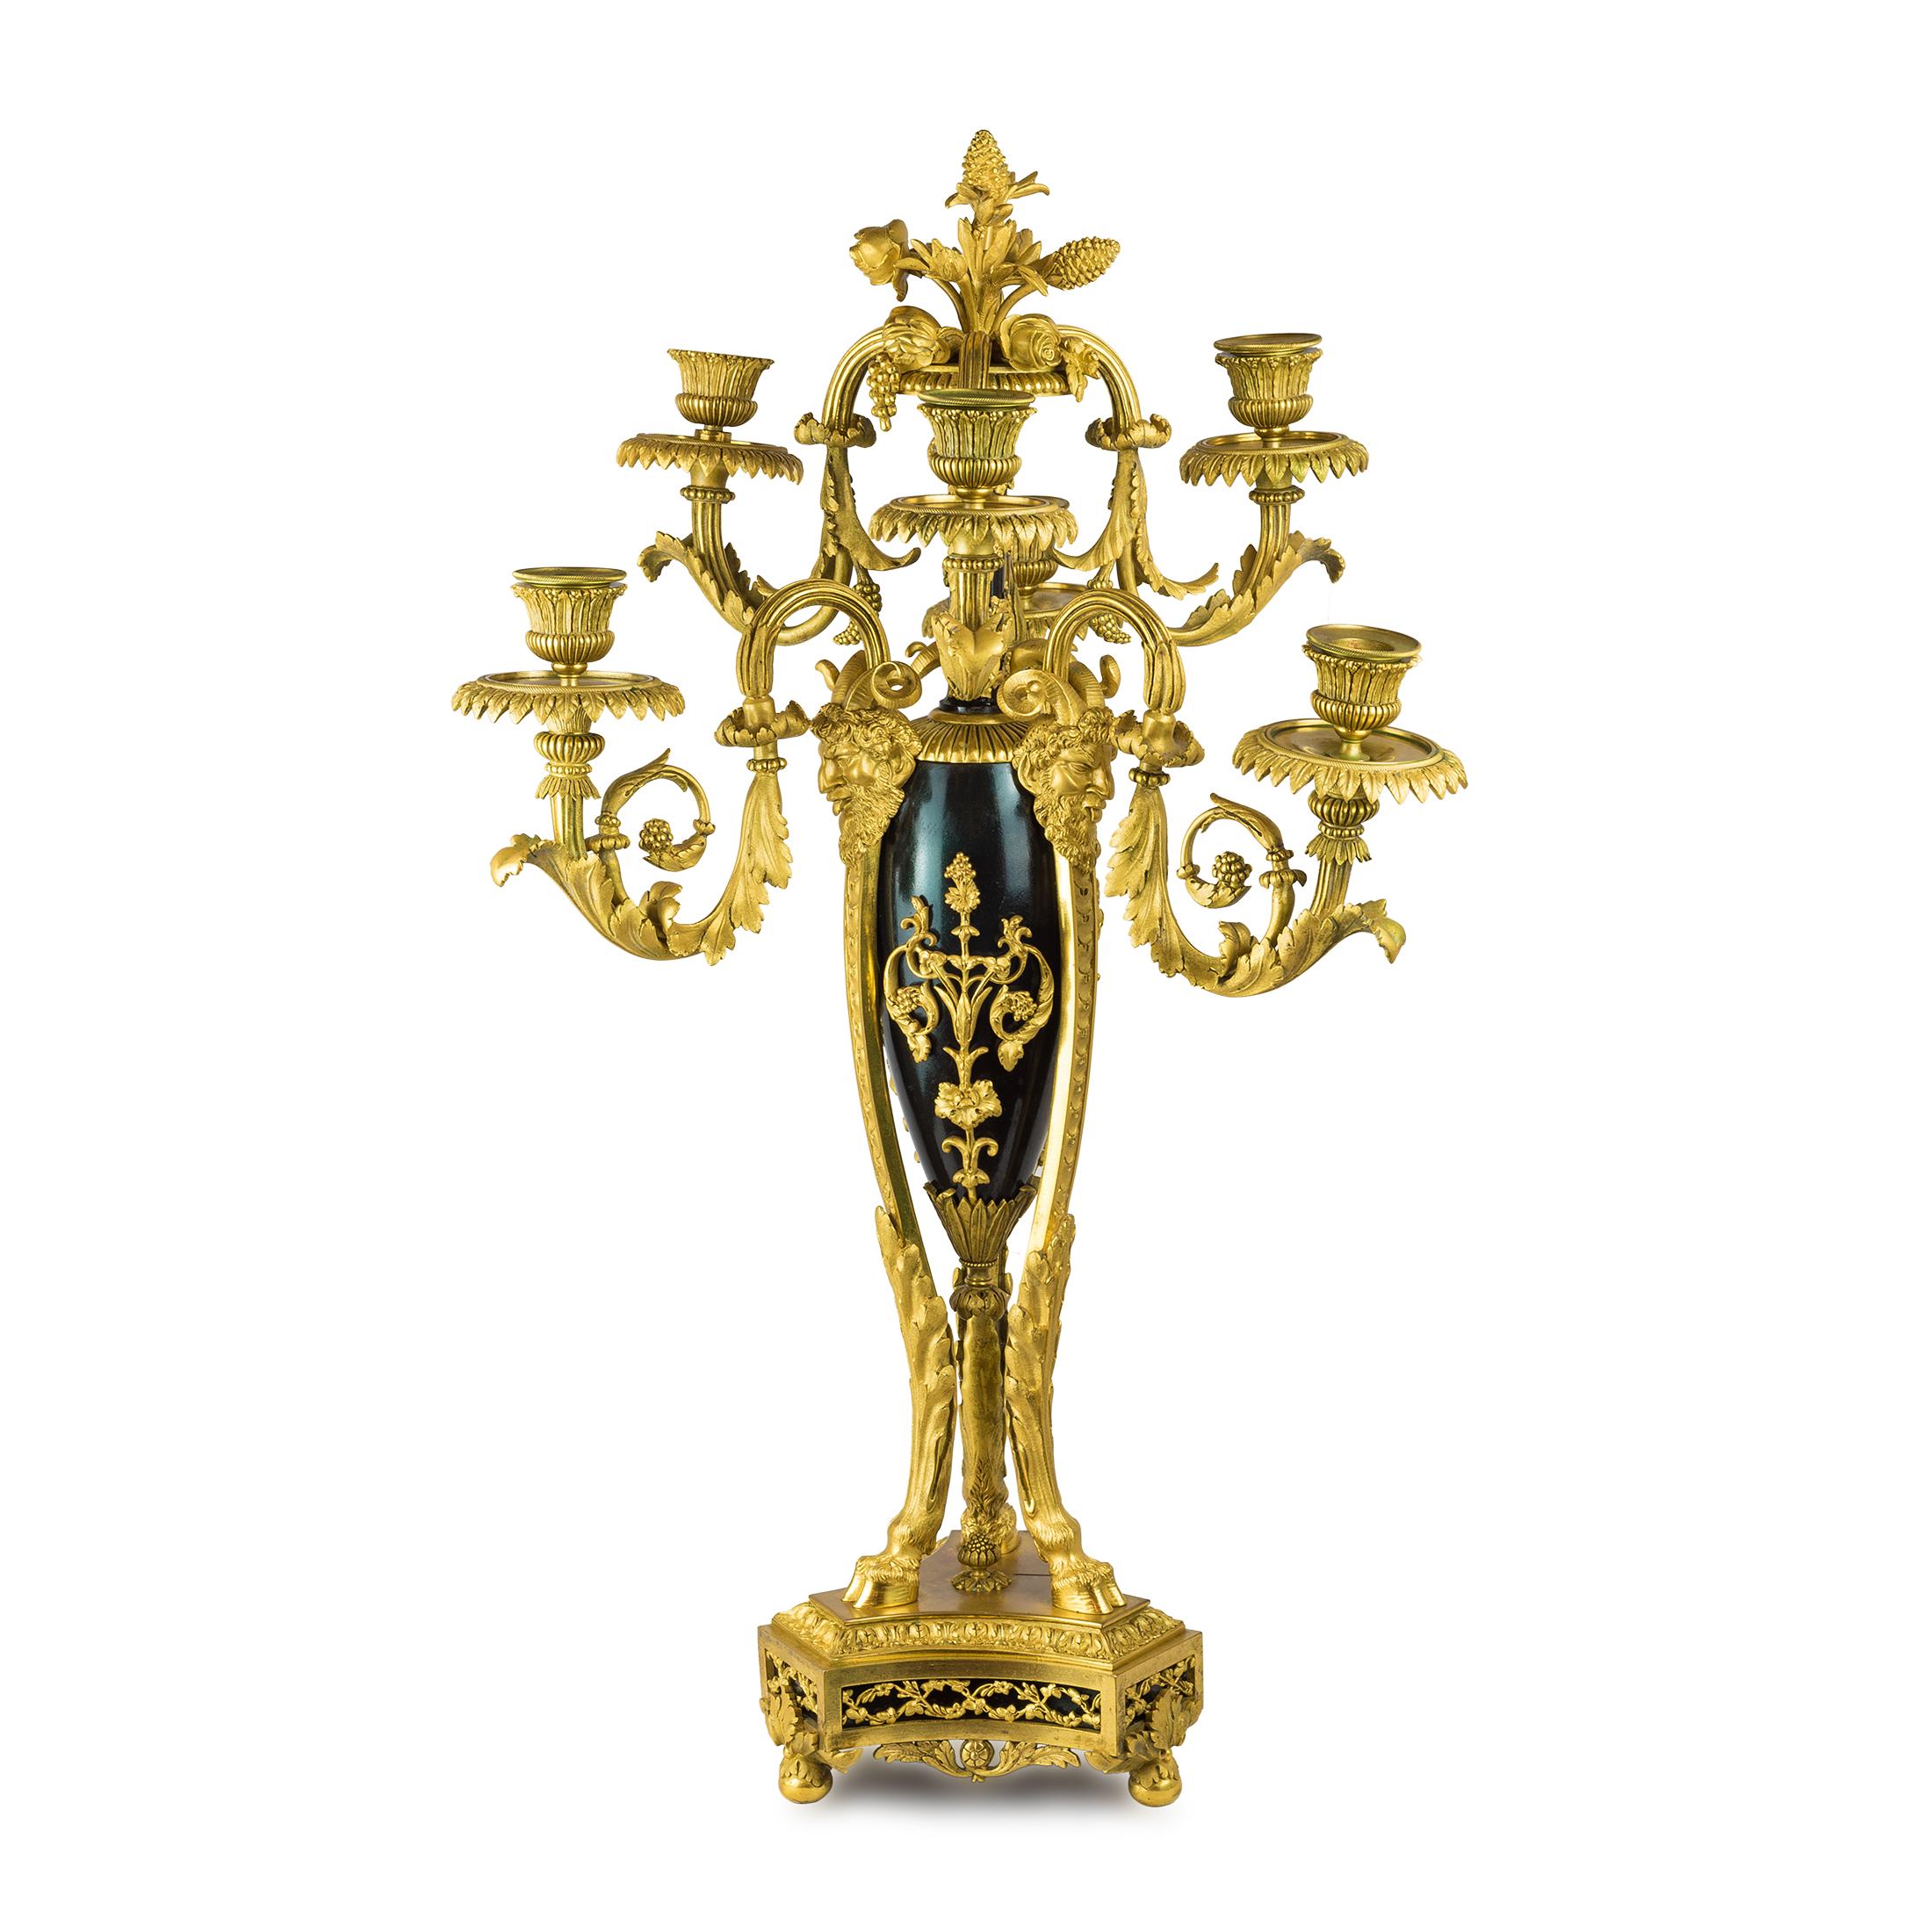 An exquisite pair of Napoleon III gilt bronze six-light candelabras attributed to Emmanuel-Alfred Beurdeley.

Maker: Attributed to Emmanuel-Alfred Beurdeley (1847-1919)
Origin: French
Date: 19th century
Size: 27 inches high.